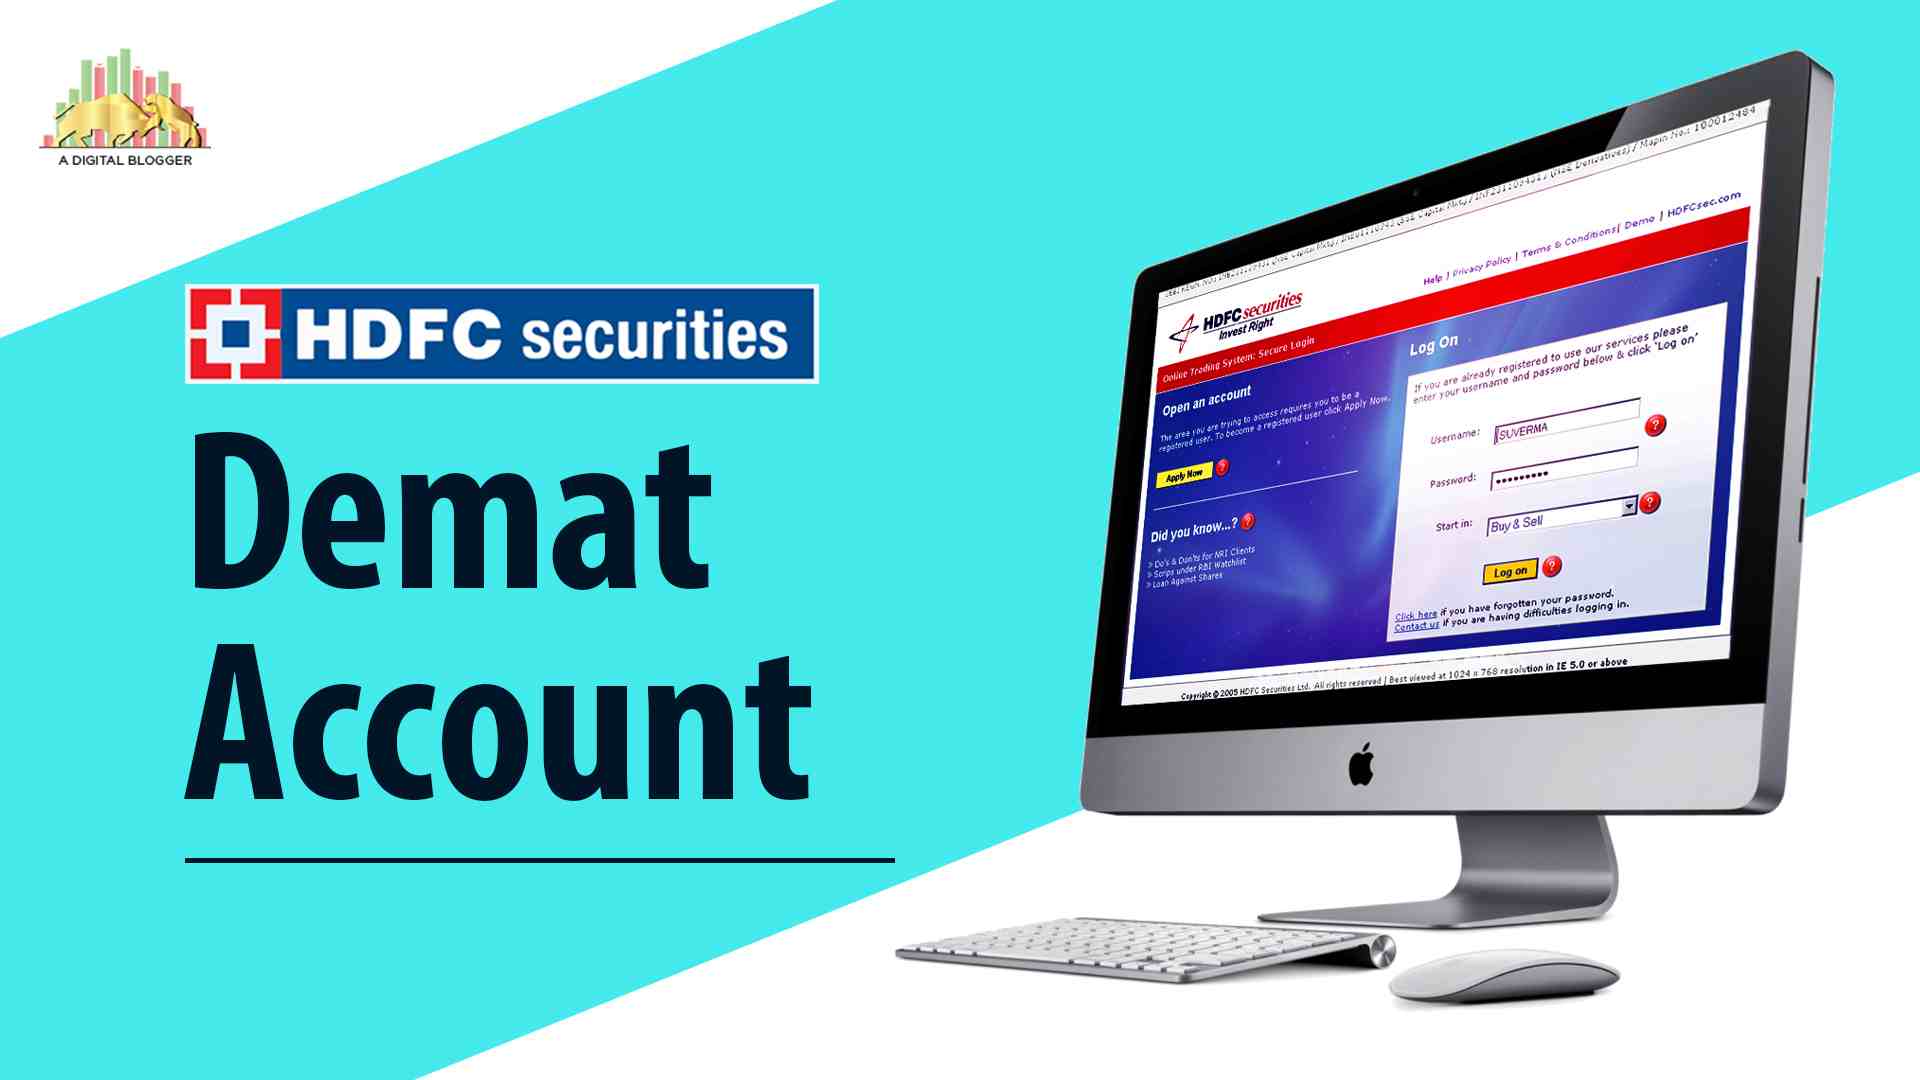 HDFC Demat Account Review, Features, Customer Care, App, Demo